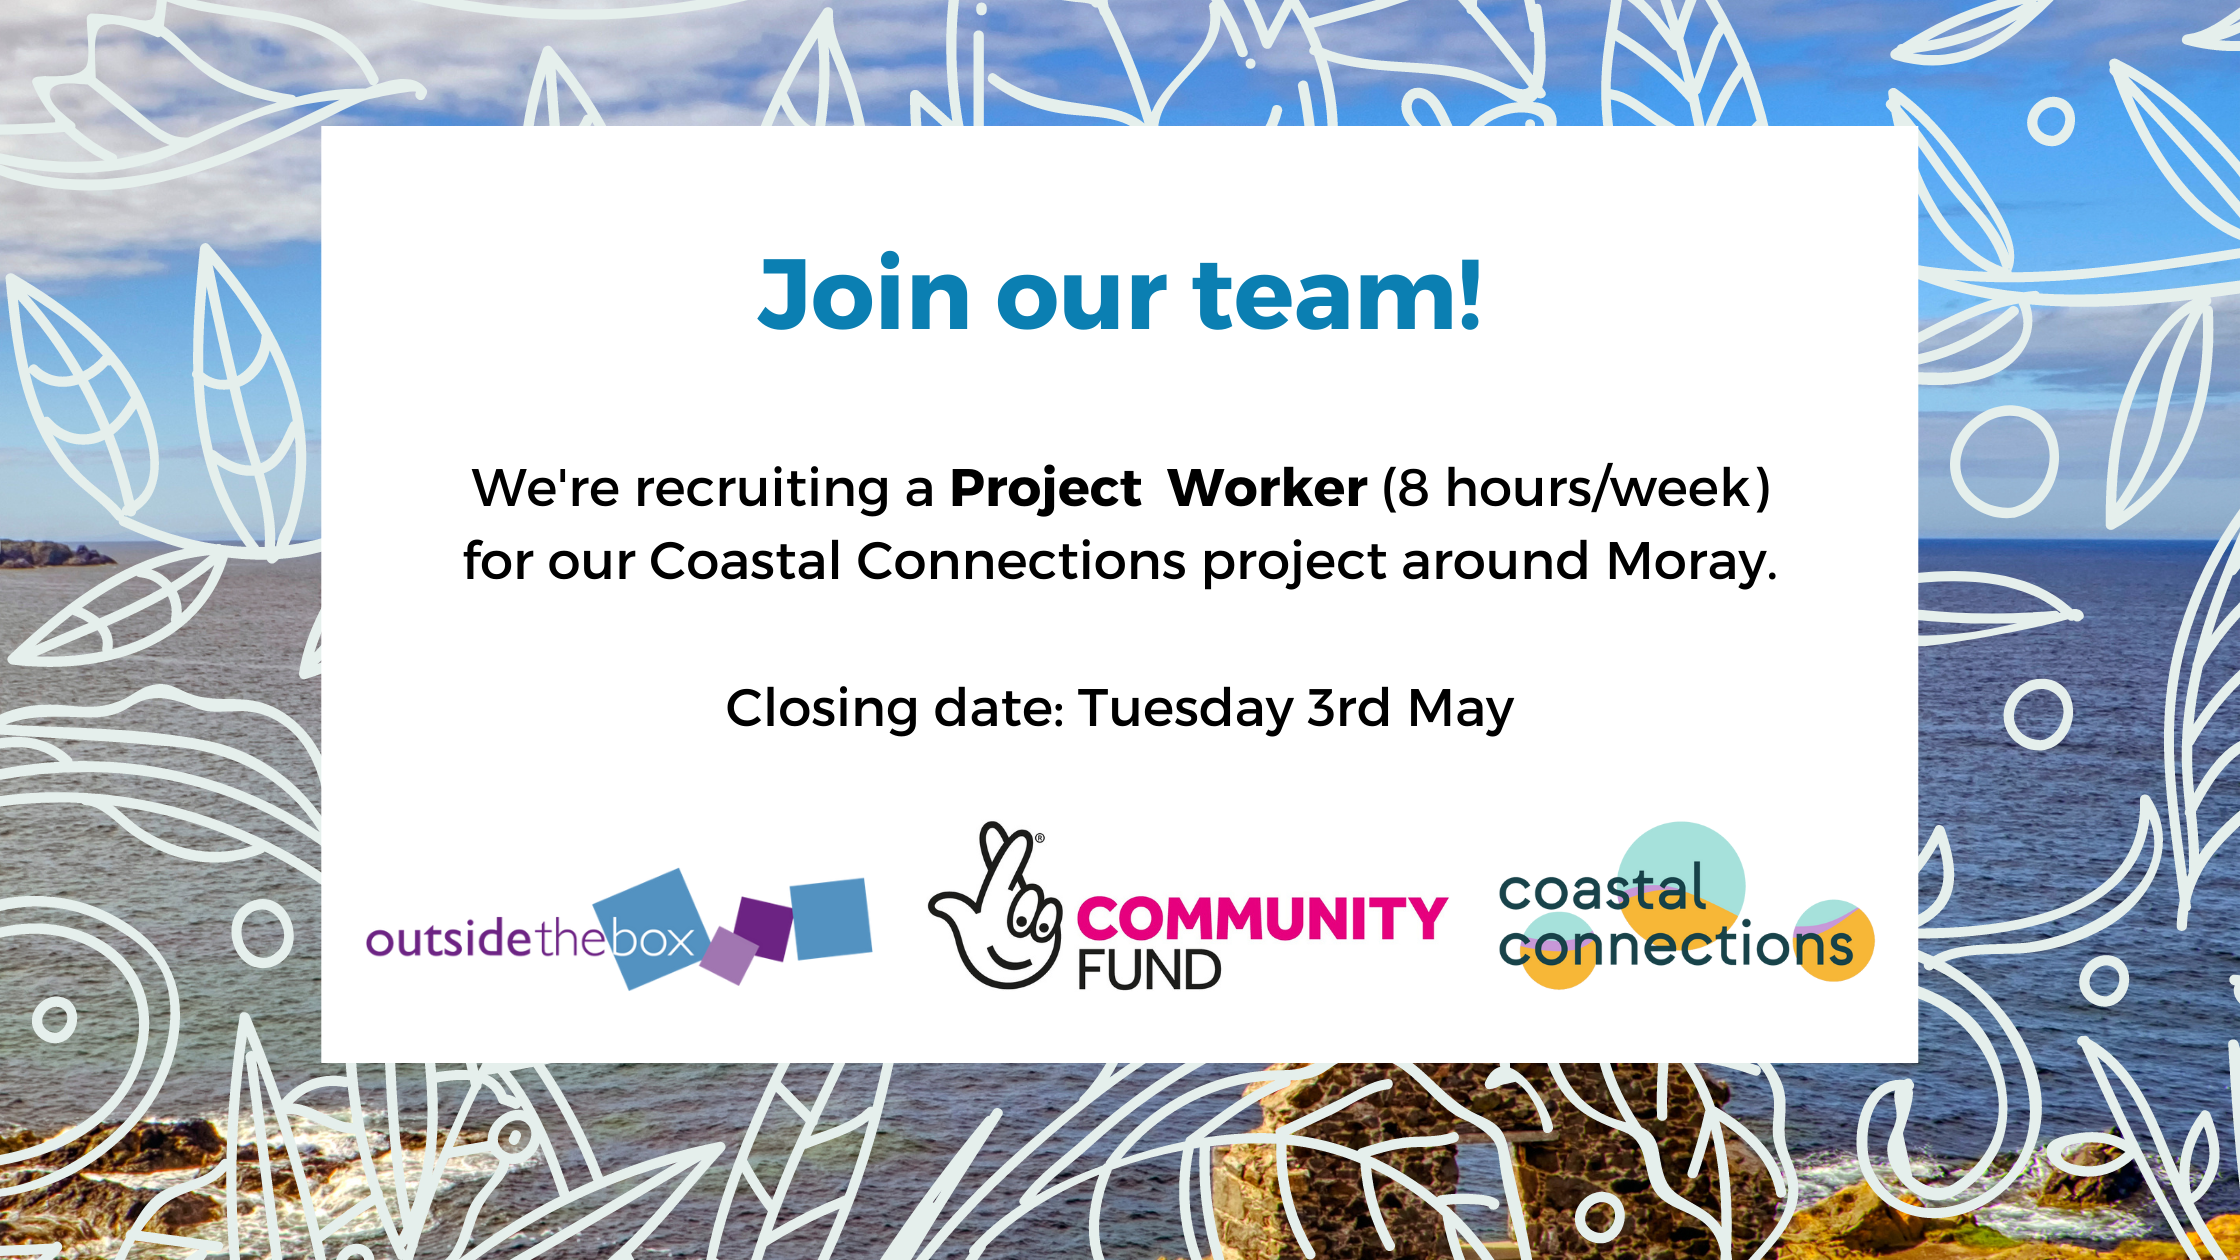 Join our team! We're recruiting a Project Worker 8 hours a week for our Coastal Connections project around Moray. Closing date Tuesday 3rd May